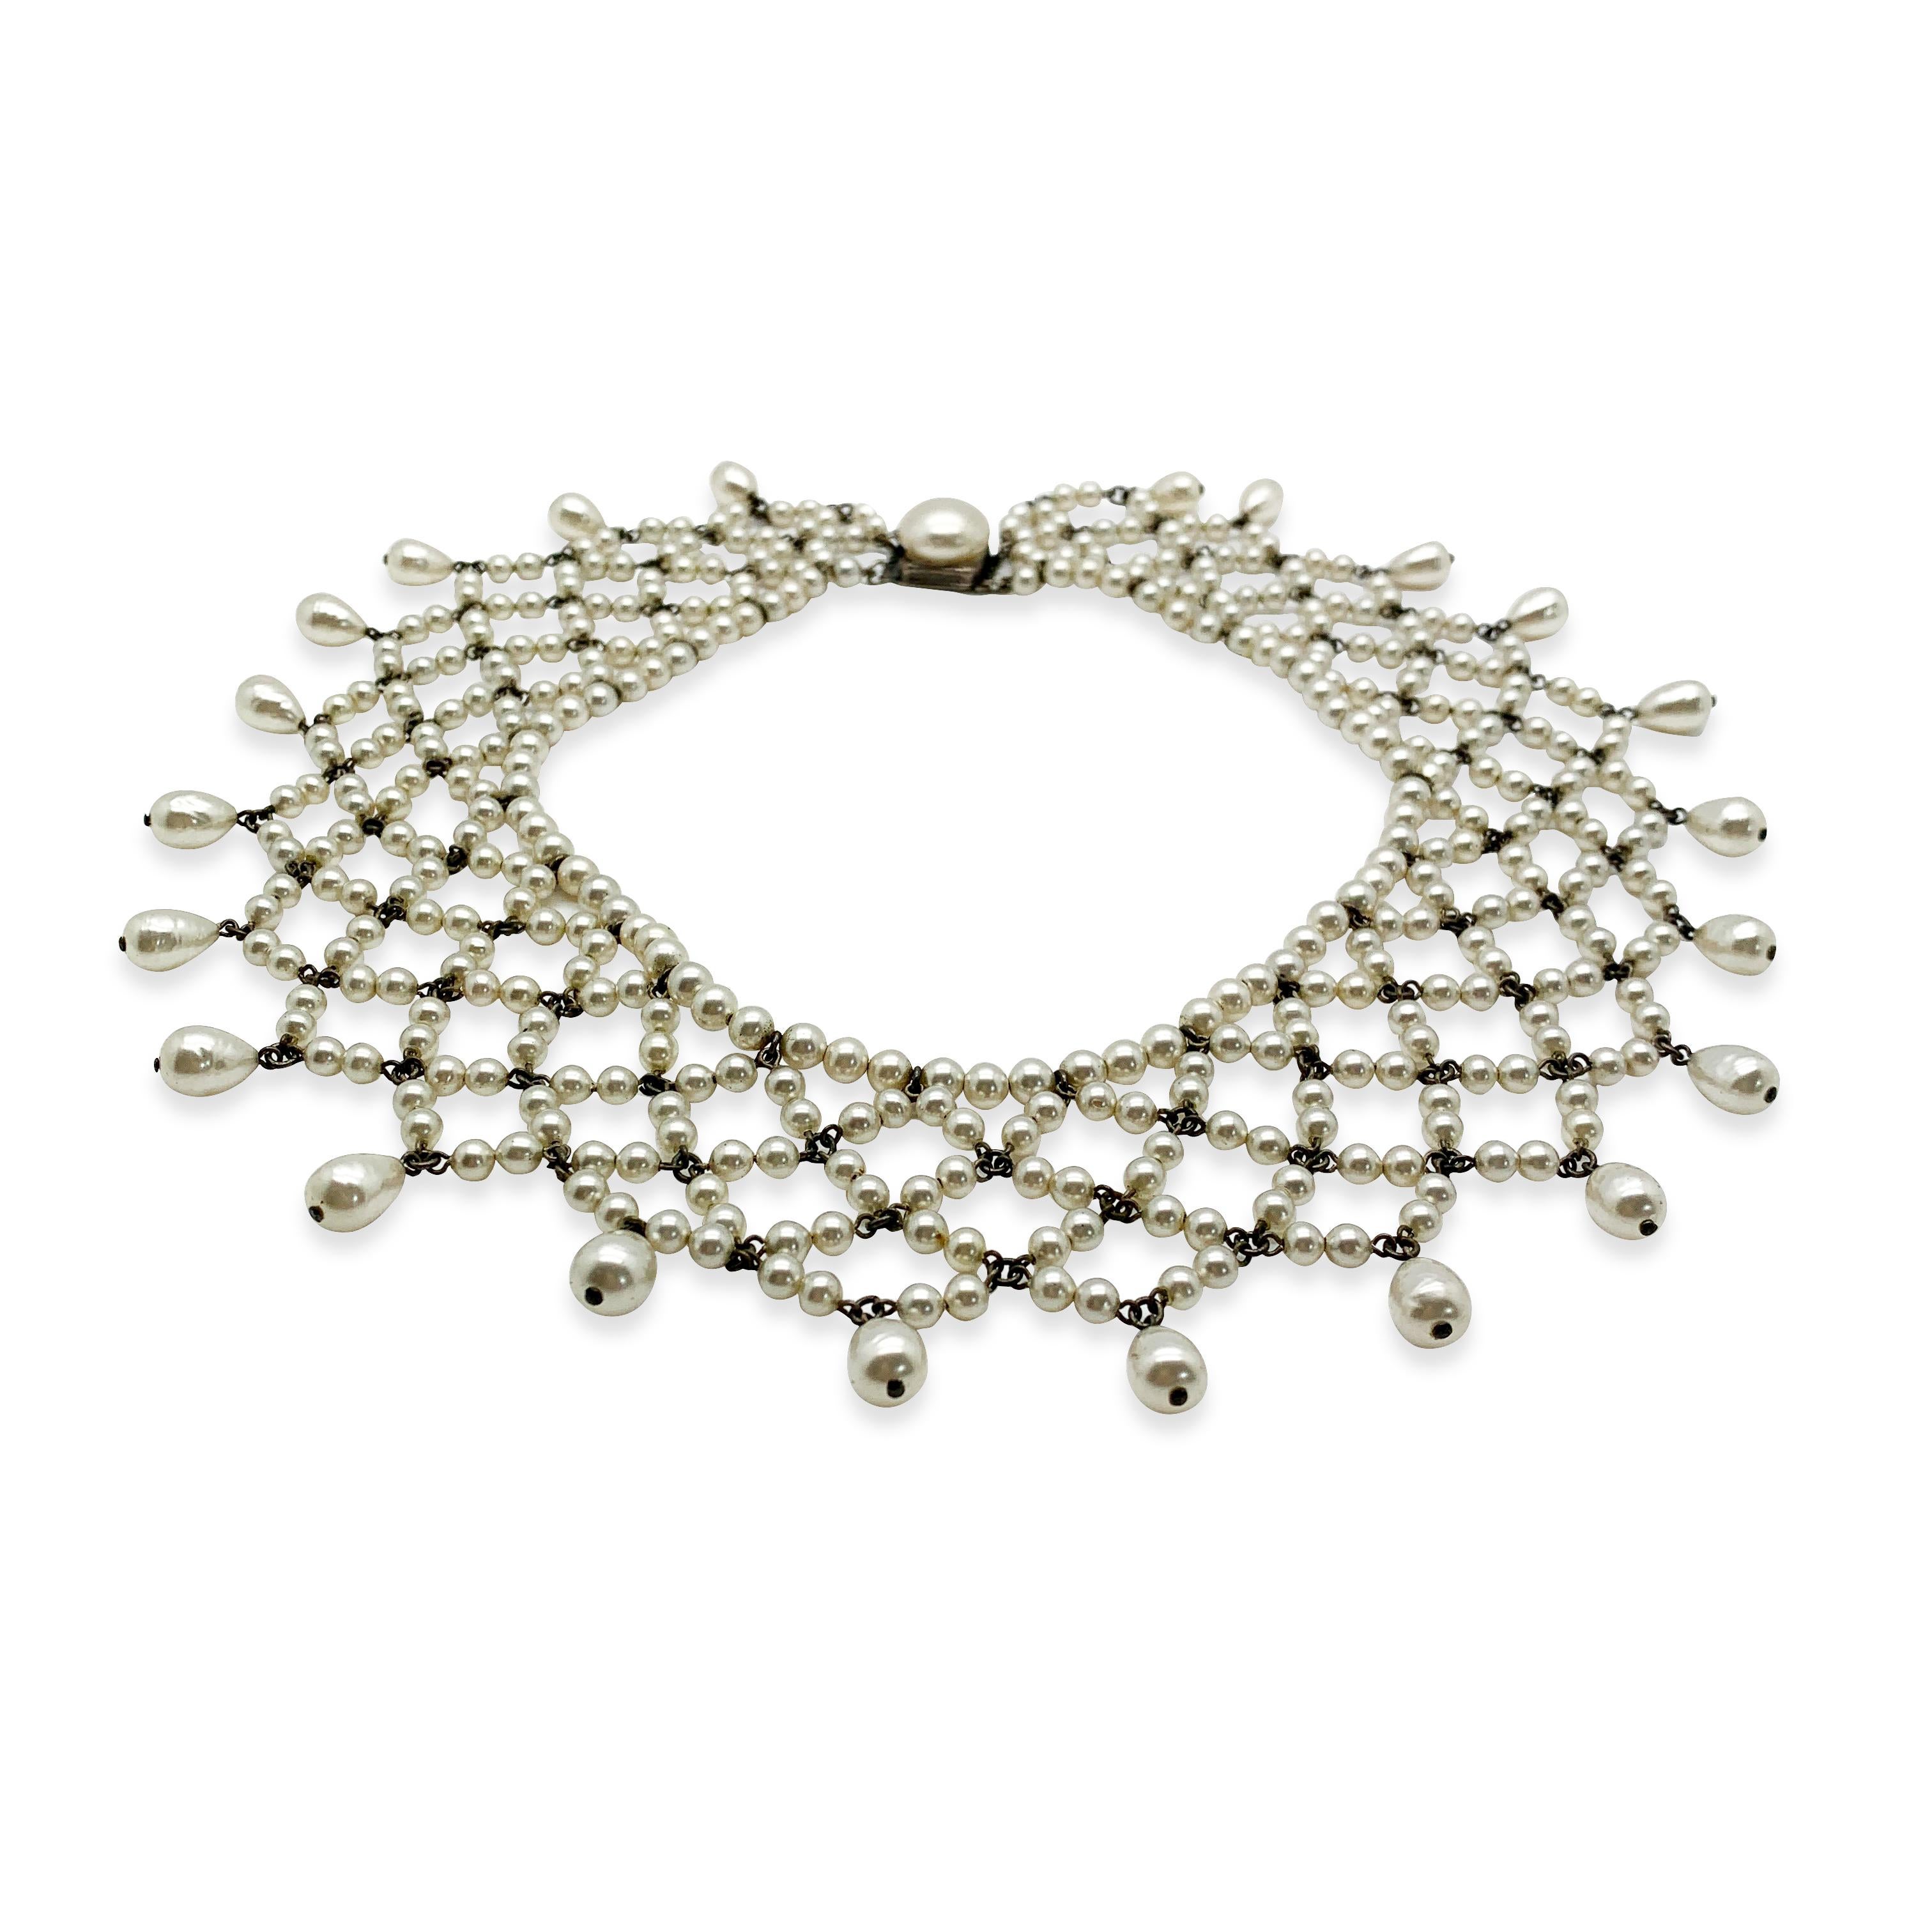 A truly beautiful, timeless Vintage Louis Rousselet Collar created in Paris. Crafted in silver tone metal and glass pearls. Featuring a lacey style collar of beautiful lustrous, most likely poured glass pearls, including round and teardrop and